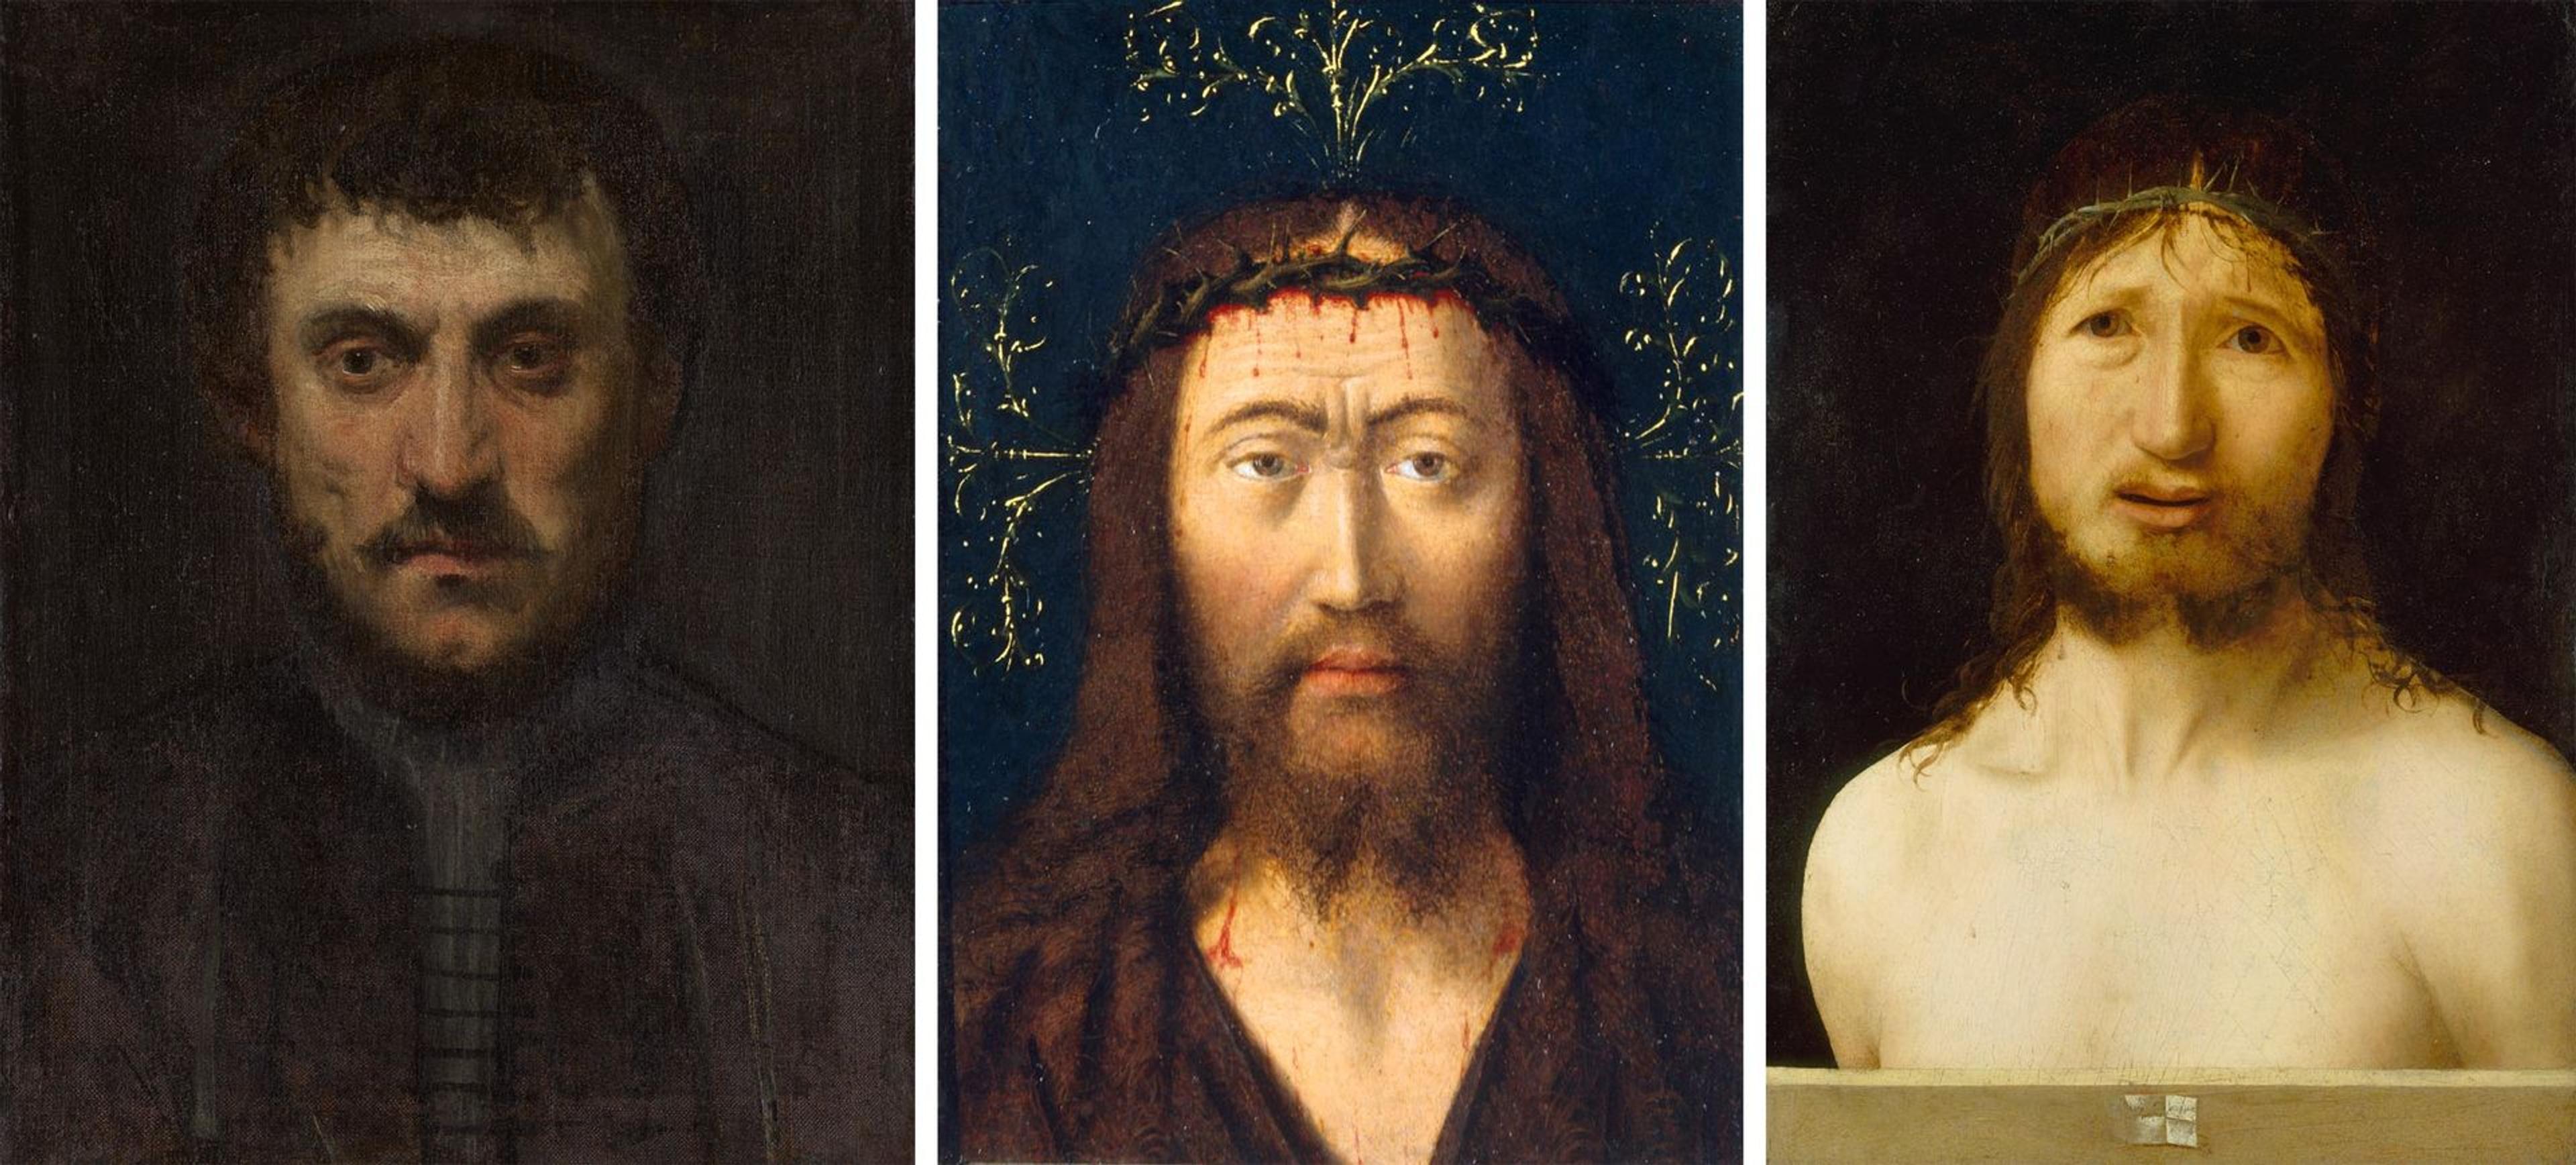 Three portraits of men looking directly at the viewer by Jacopo Tintoretto (left), Petrus Christus (center), and Antonello da Messina (right)